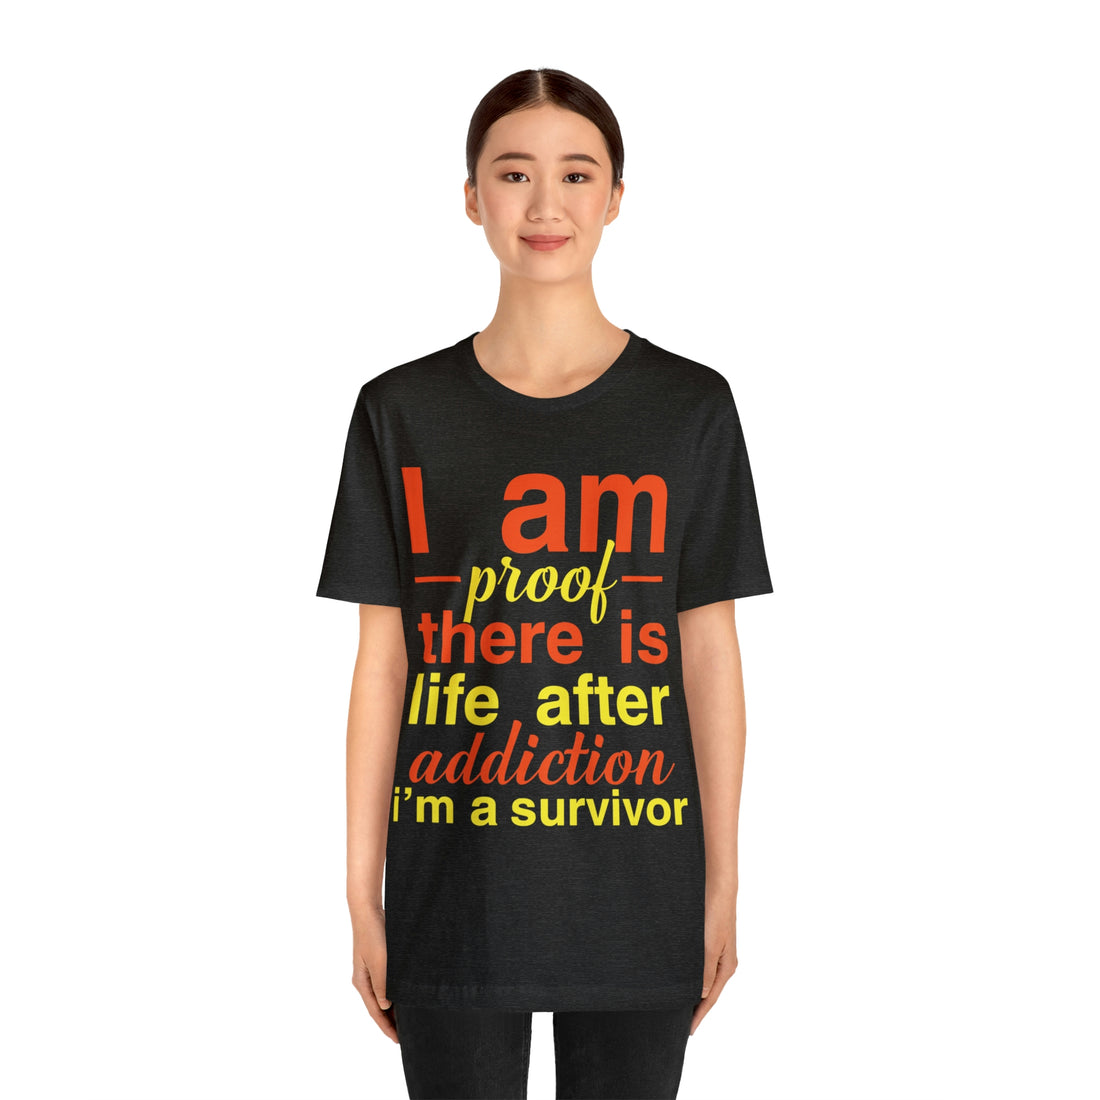 I Am Proof There Is Life After Addiction - Unisex Jersey Short Sleeve Tee